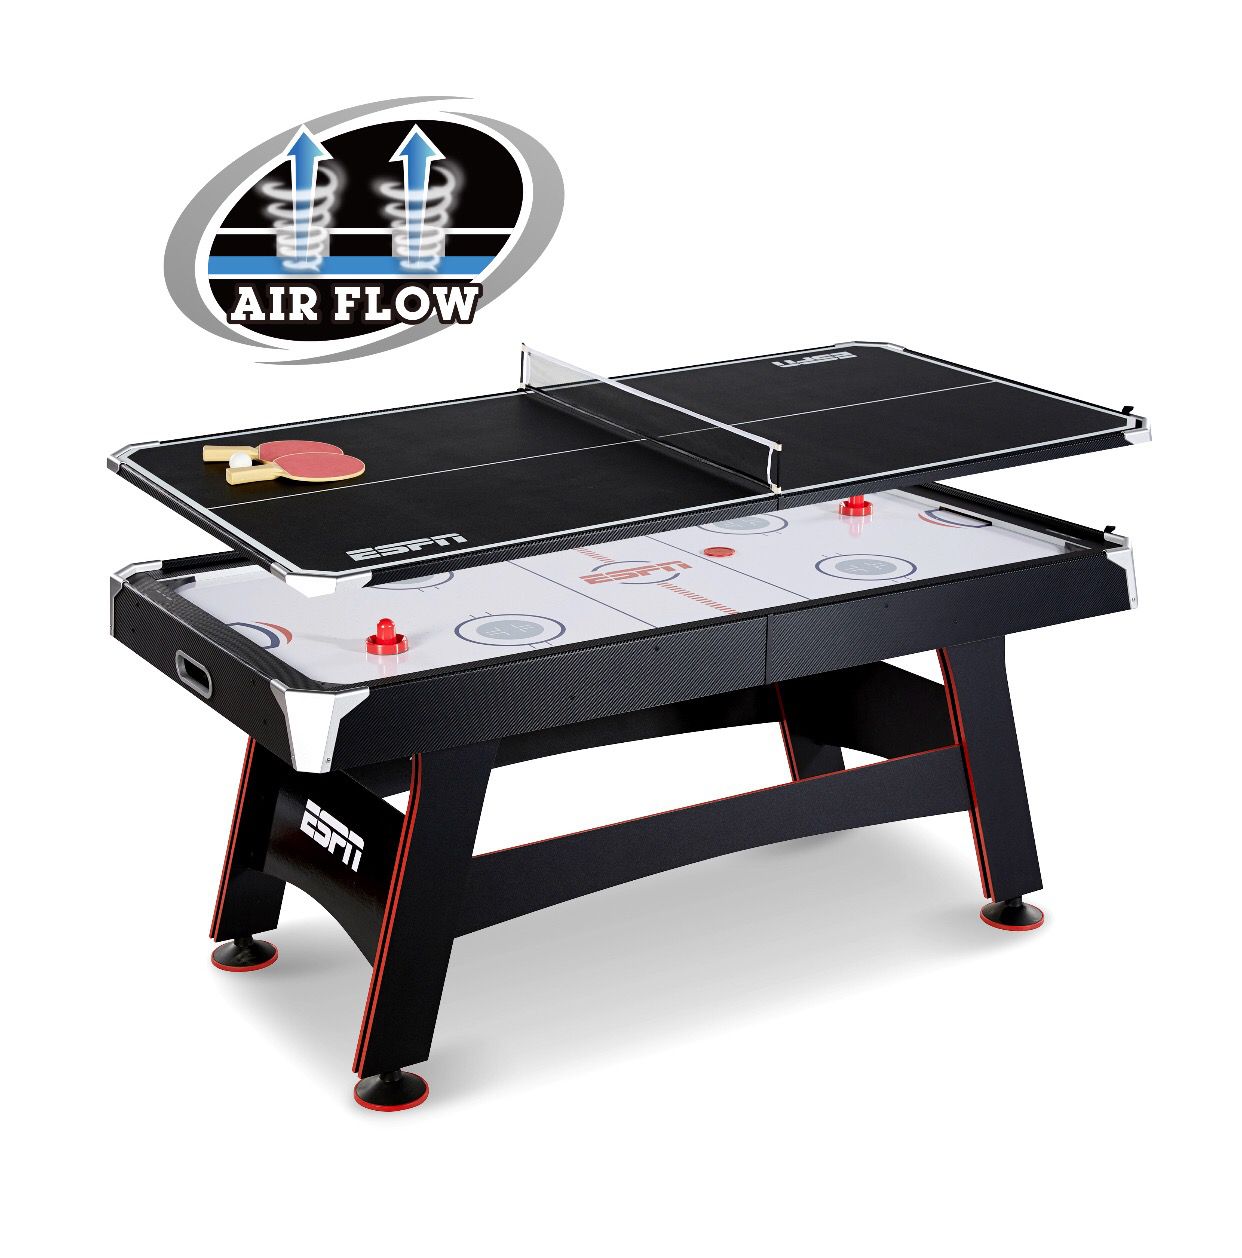 ESPN 72 inch air powered hockey table with table tennis top and in rail soccer